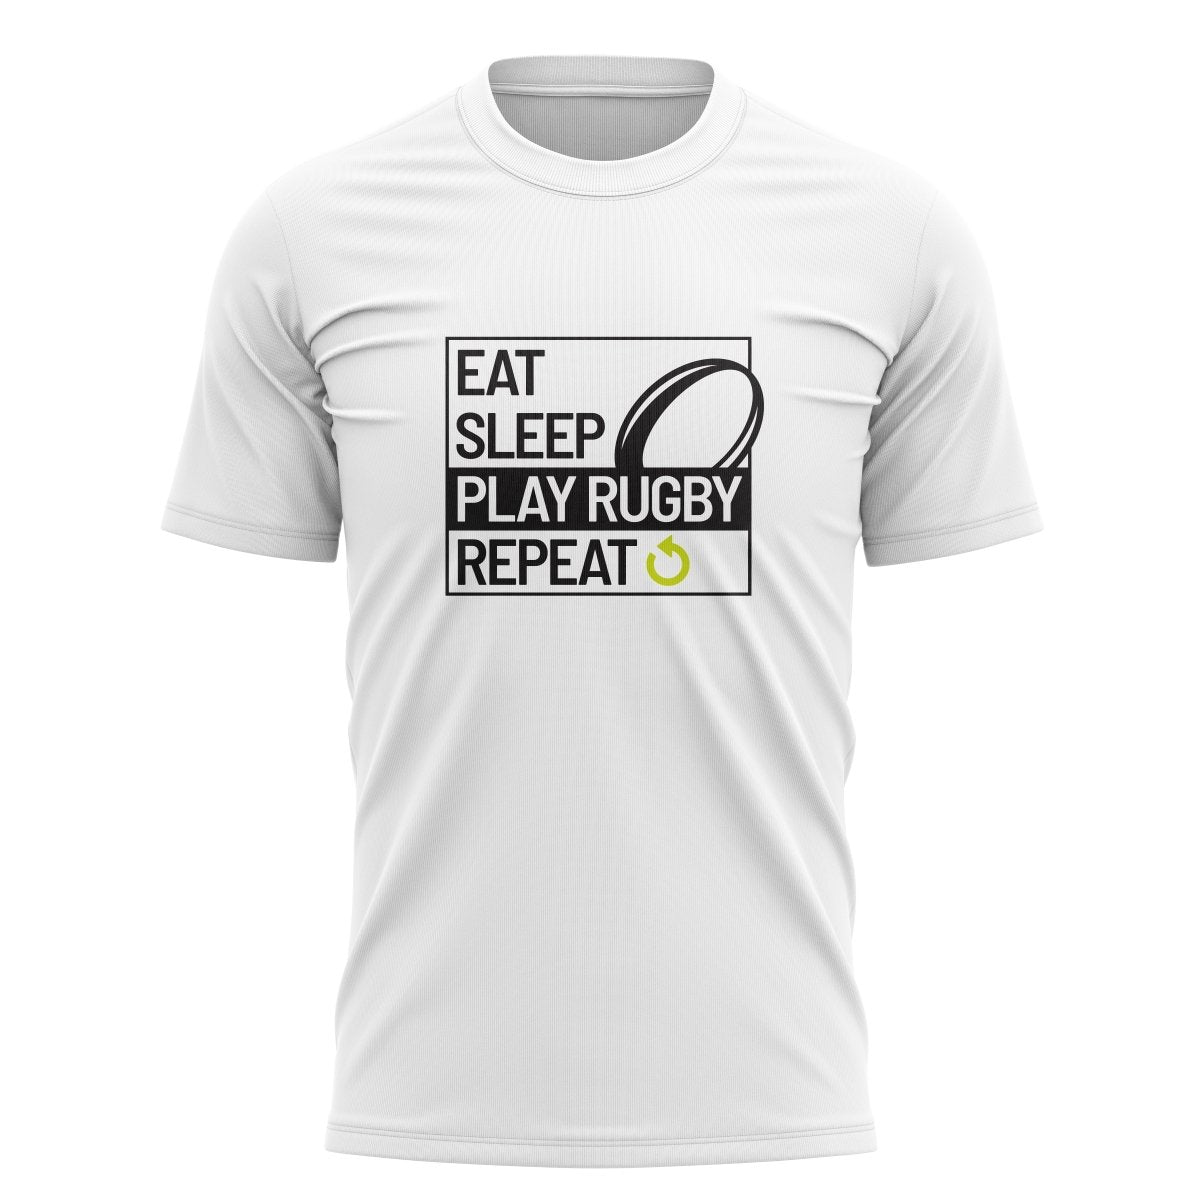 Eat Sleep Rugby Graphic Tee - www.therugbyshop.com www.therugbyshop.com MEN&#39;S / WHITE / S SANMAR TEES Eat Sleep Rugby Graphic Tee